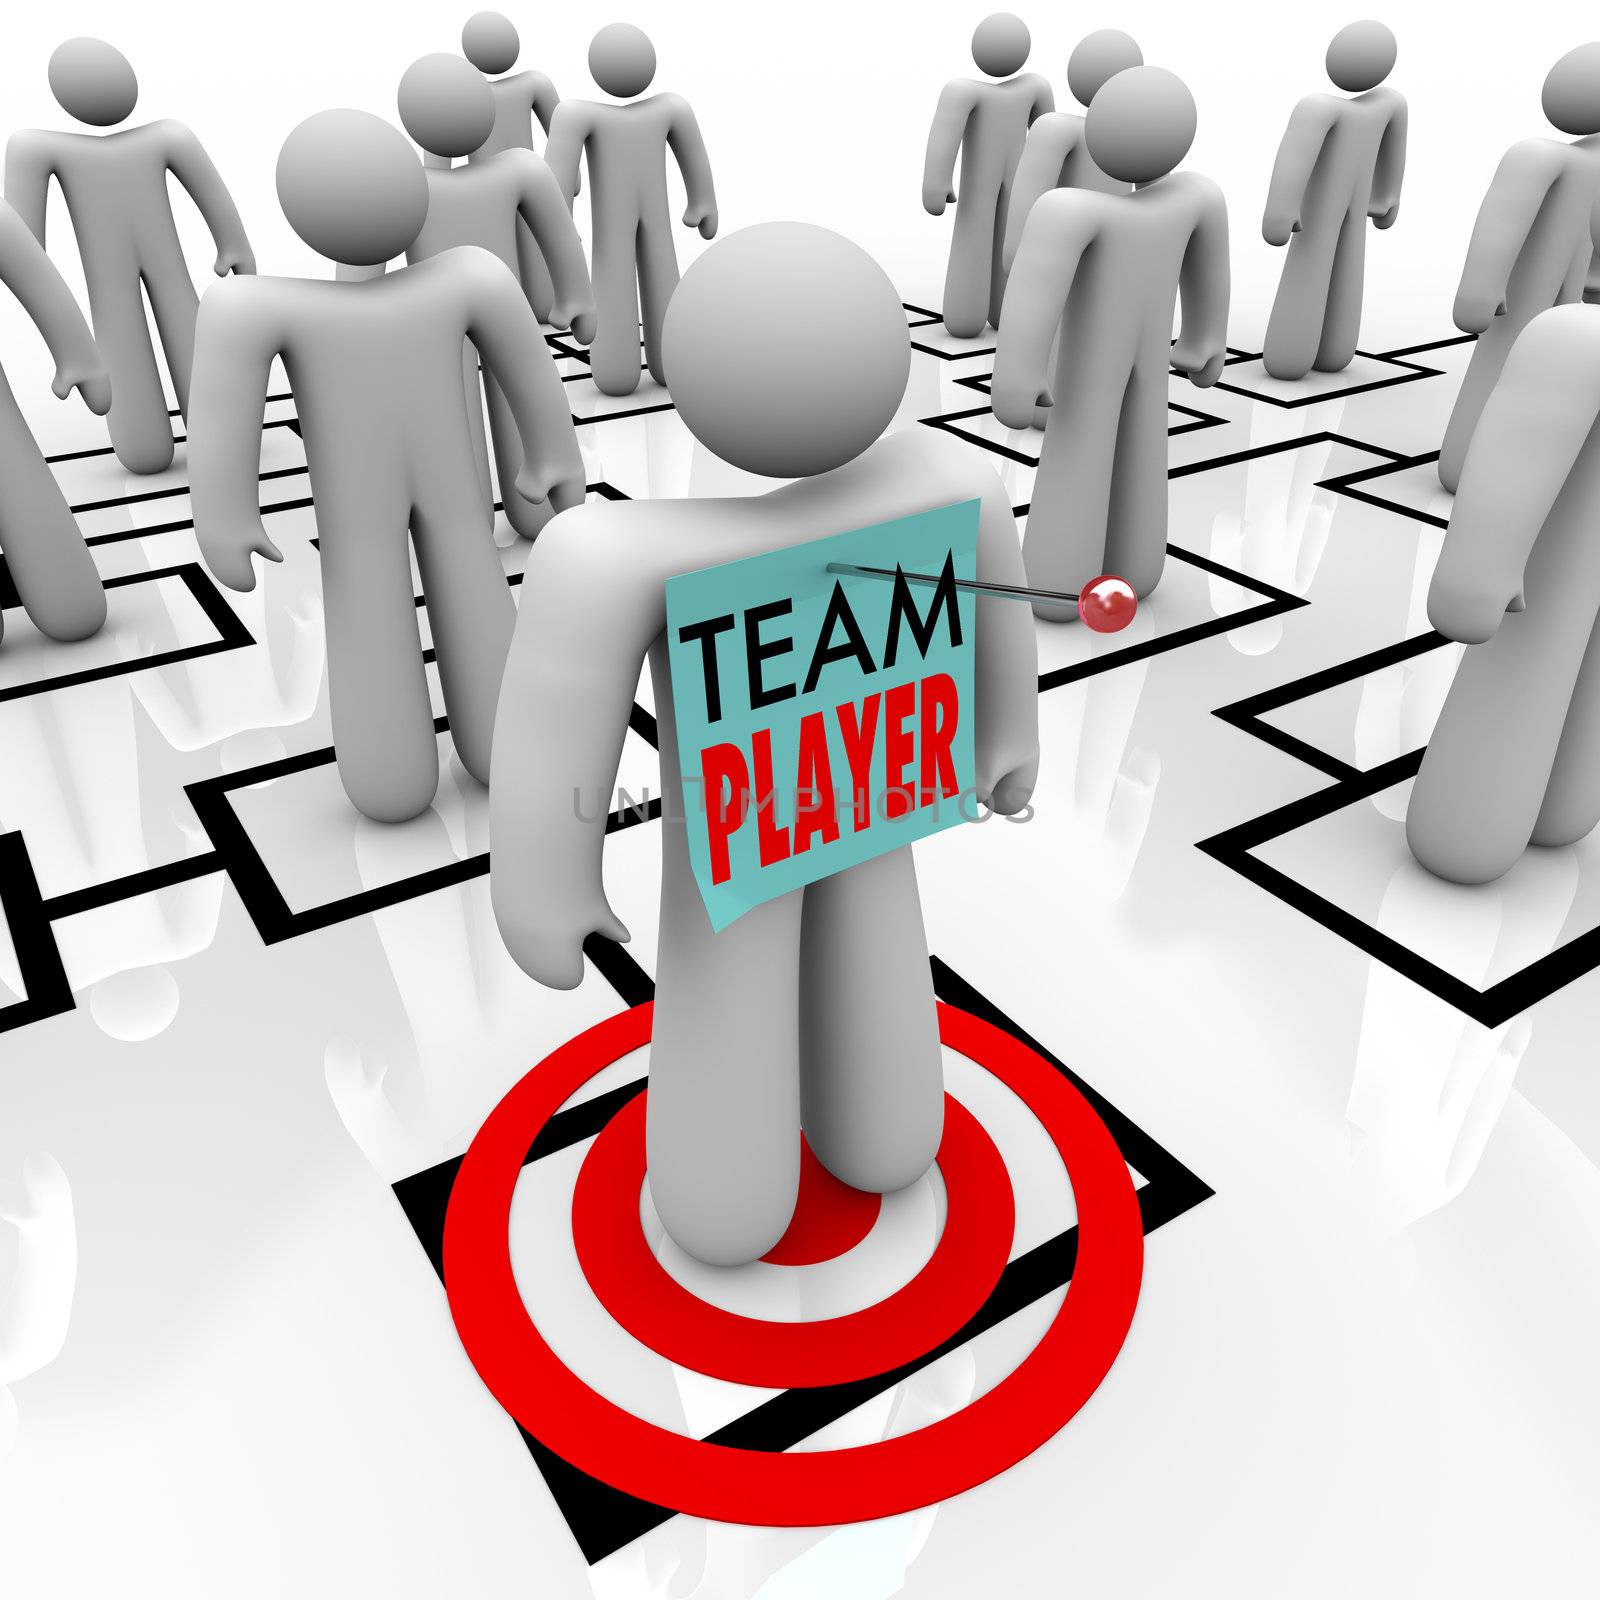 A worker marked Team Player is identified as one of the best people in an organizational chart and stands on a bulls eye to indicated he has been targeted as a top performer